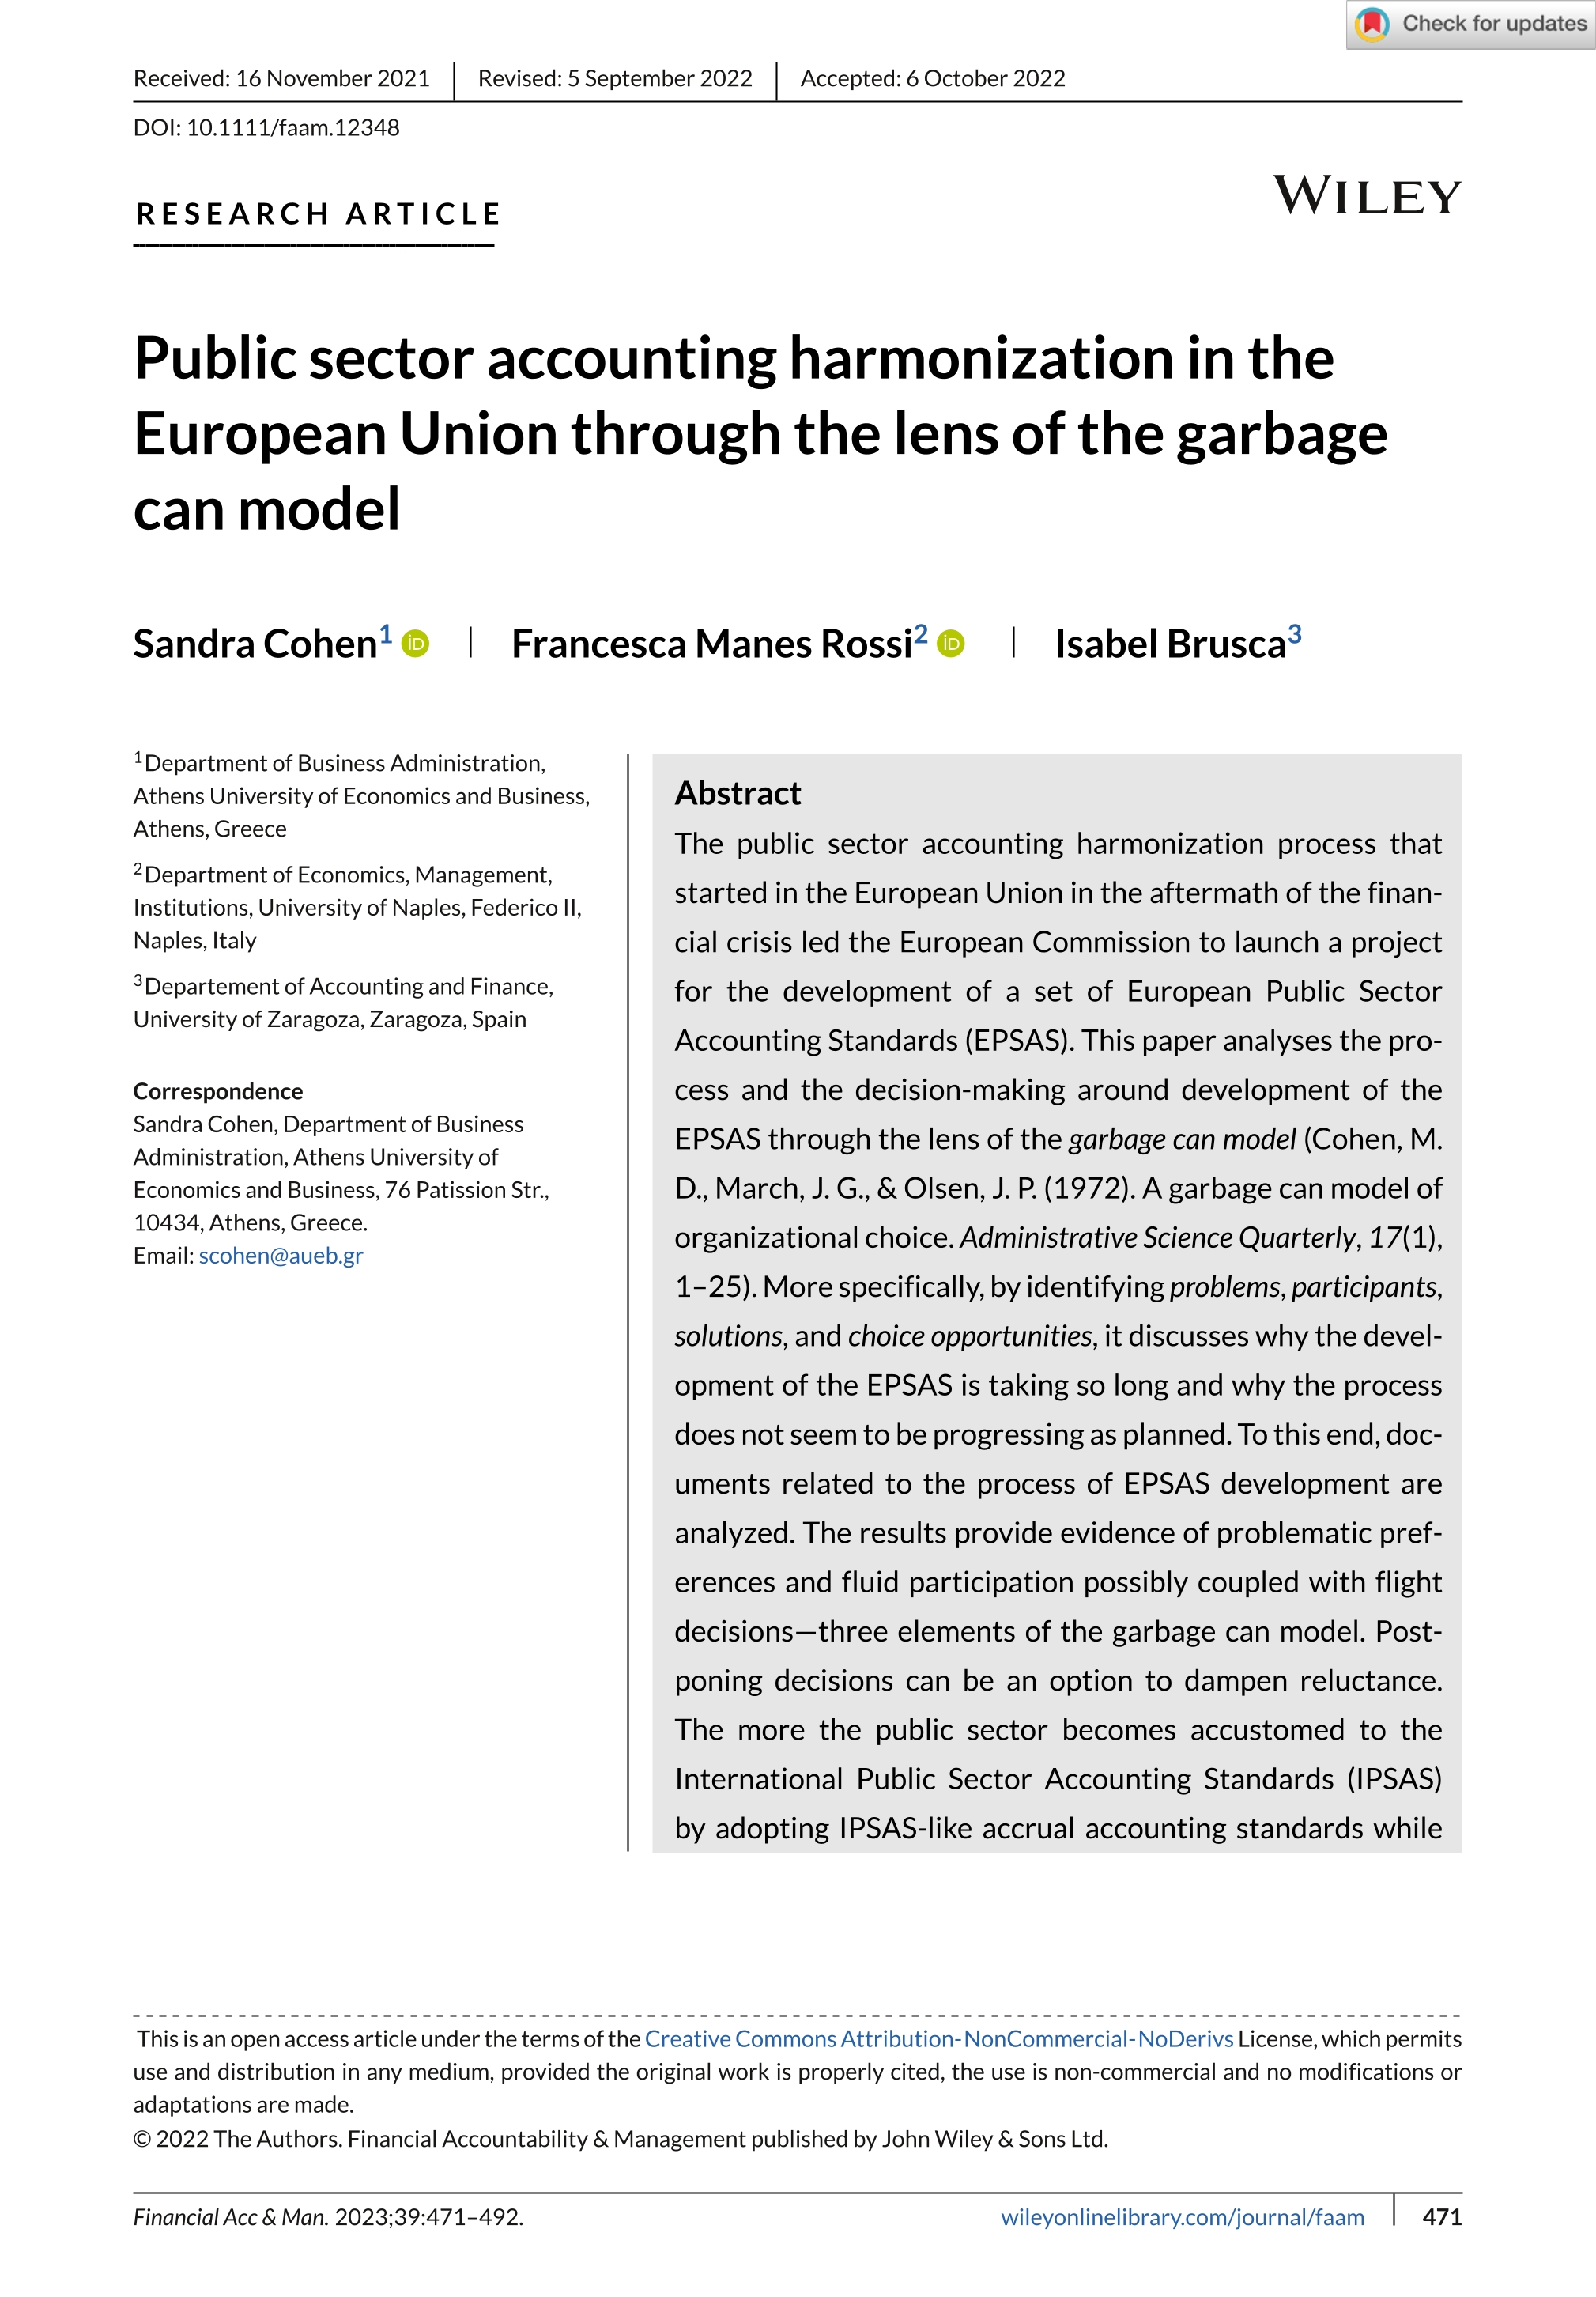 Public sector accounting harmonization in the European Union through the lens of the garbage can model